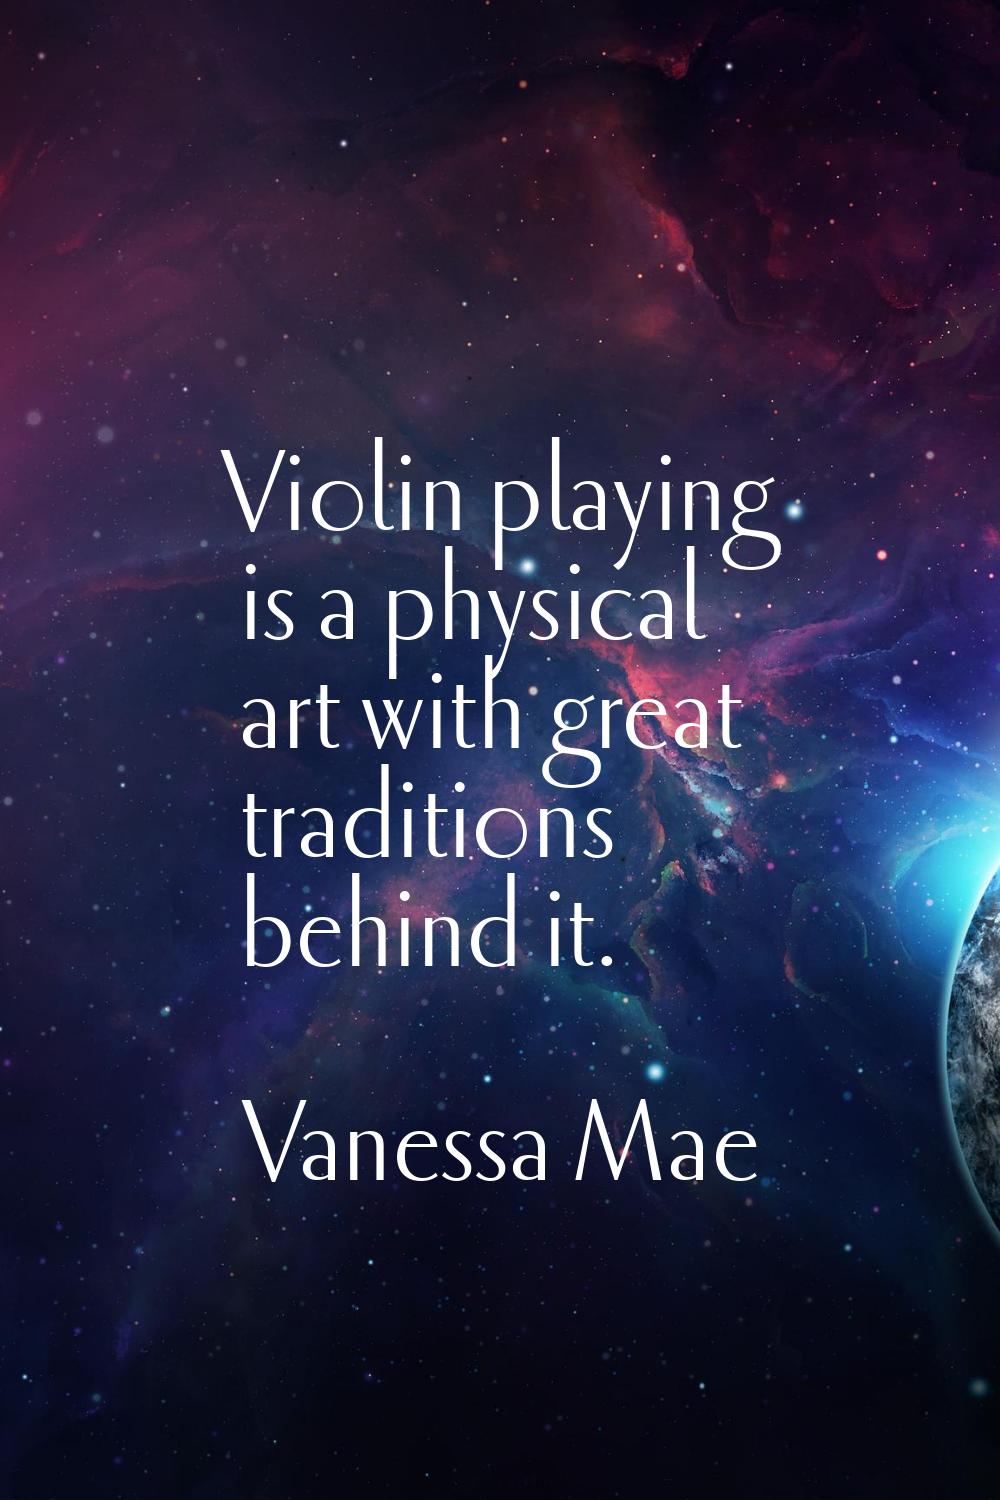 Violin playing is a physical art with great traditions behind it.